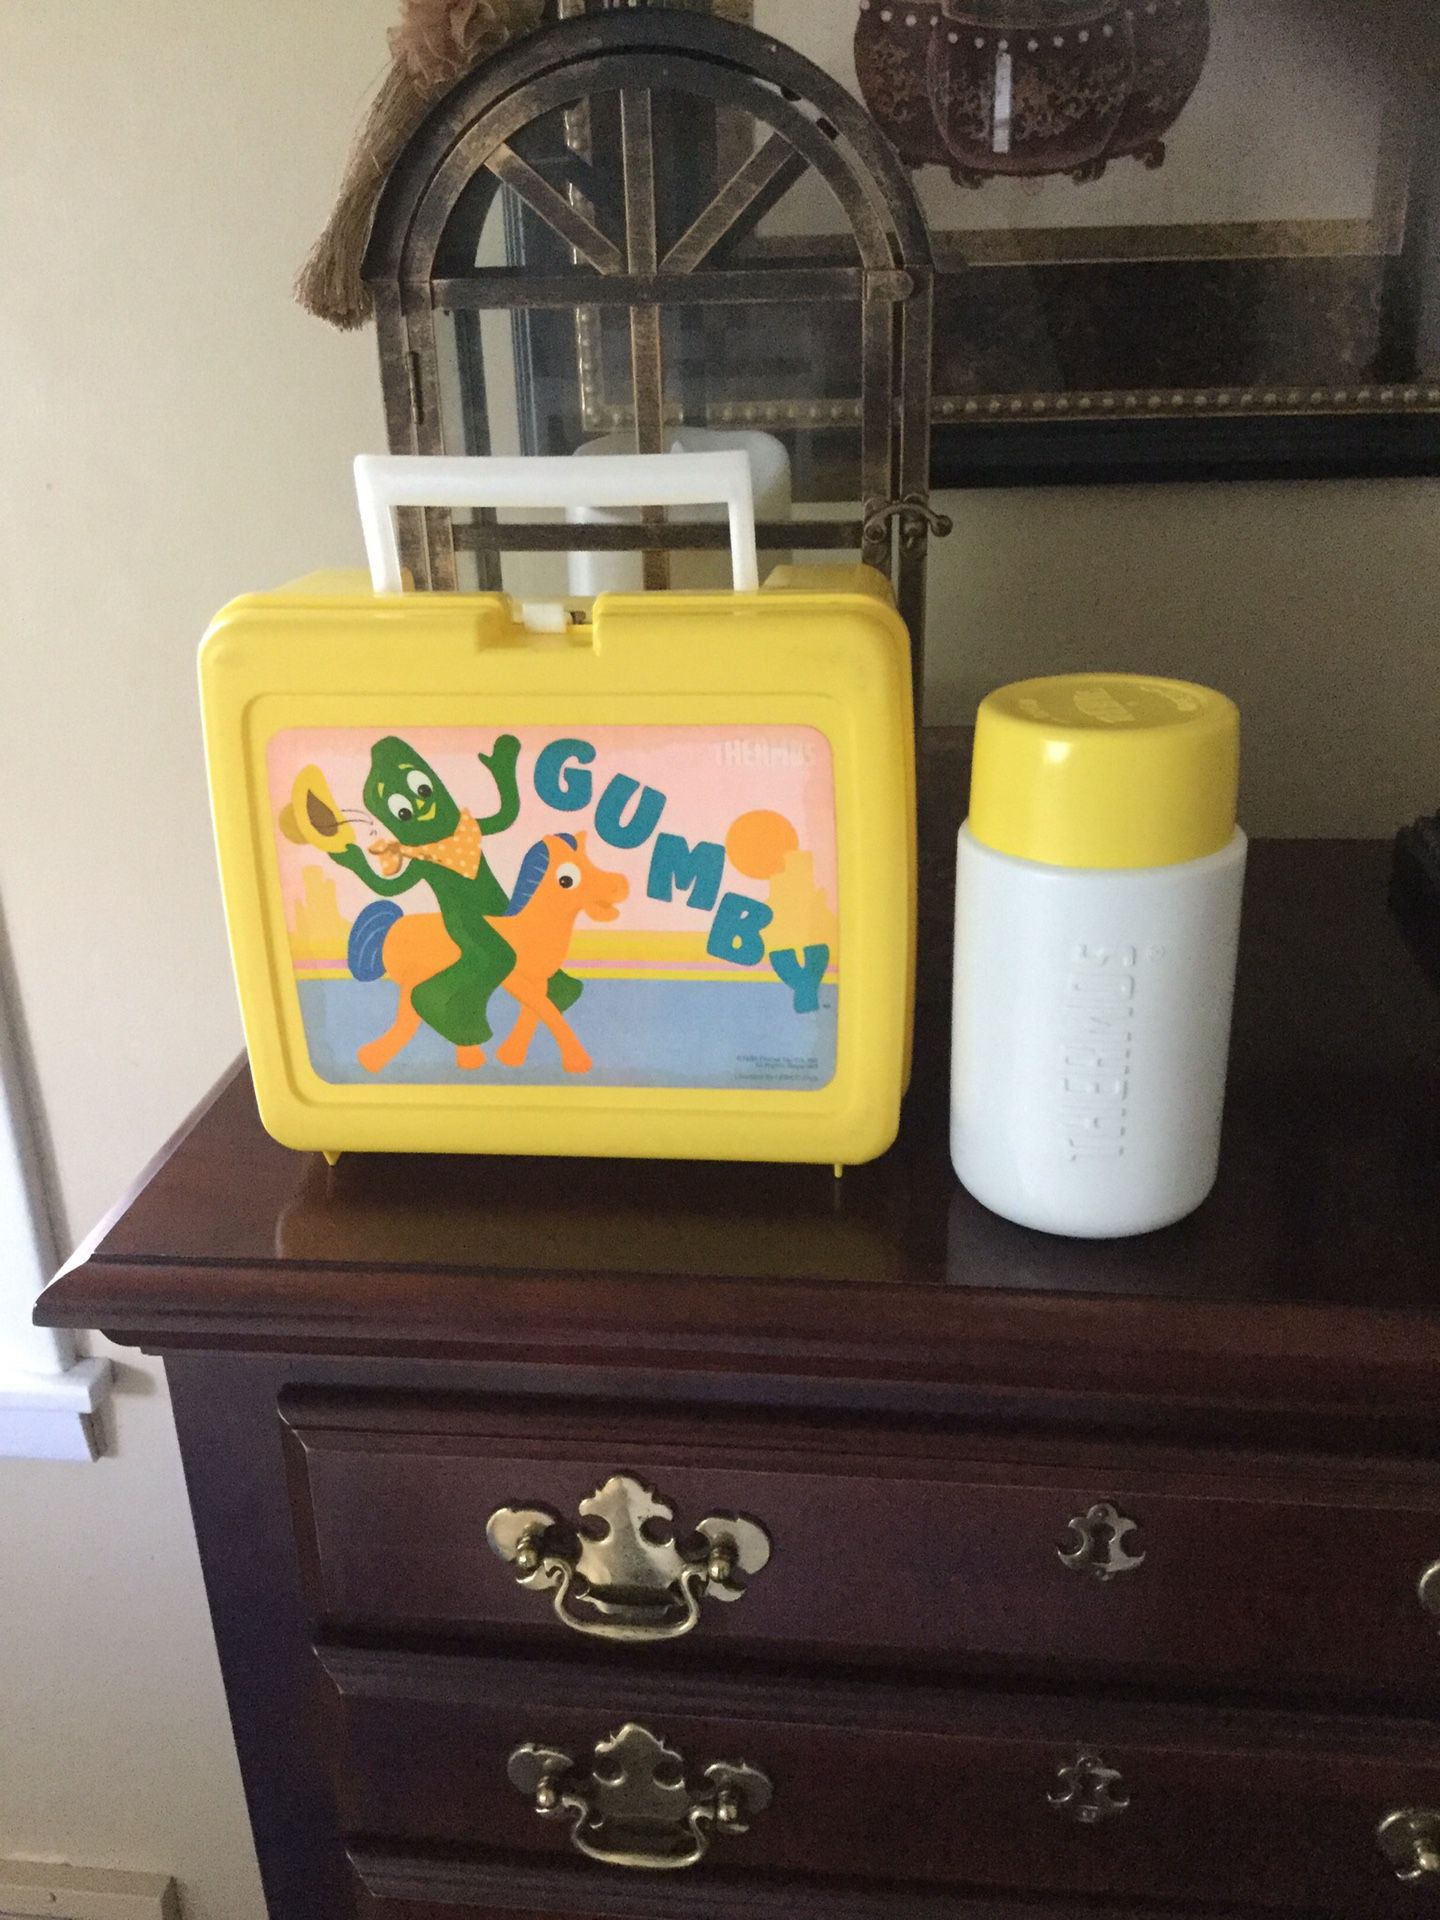 Vintage and excellent Gumby lunch box and matching thermos